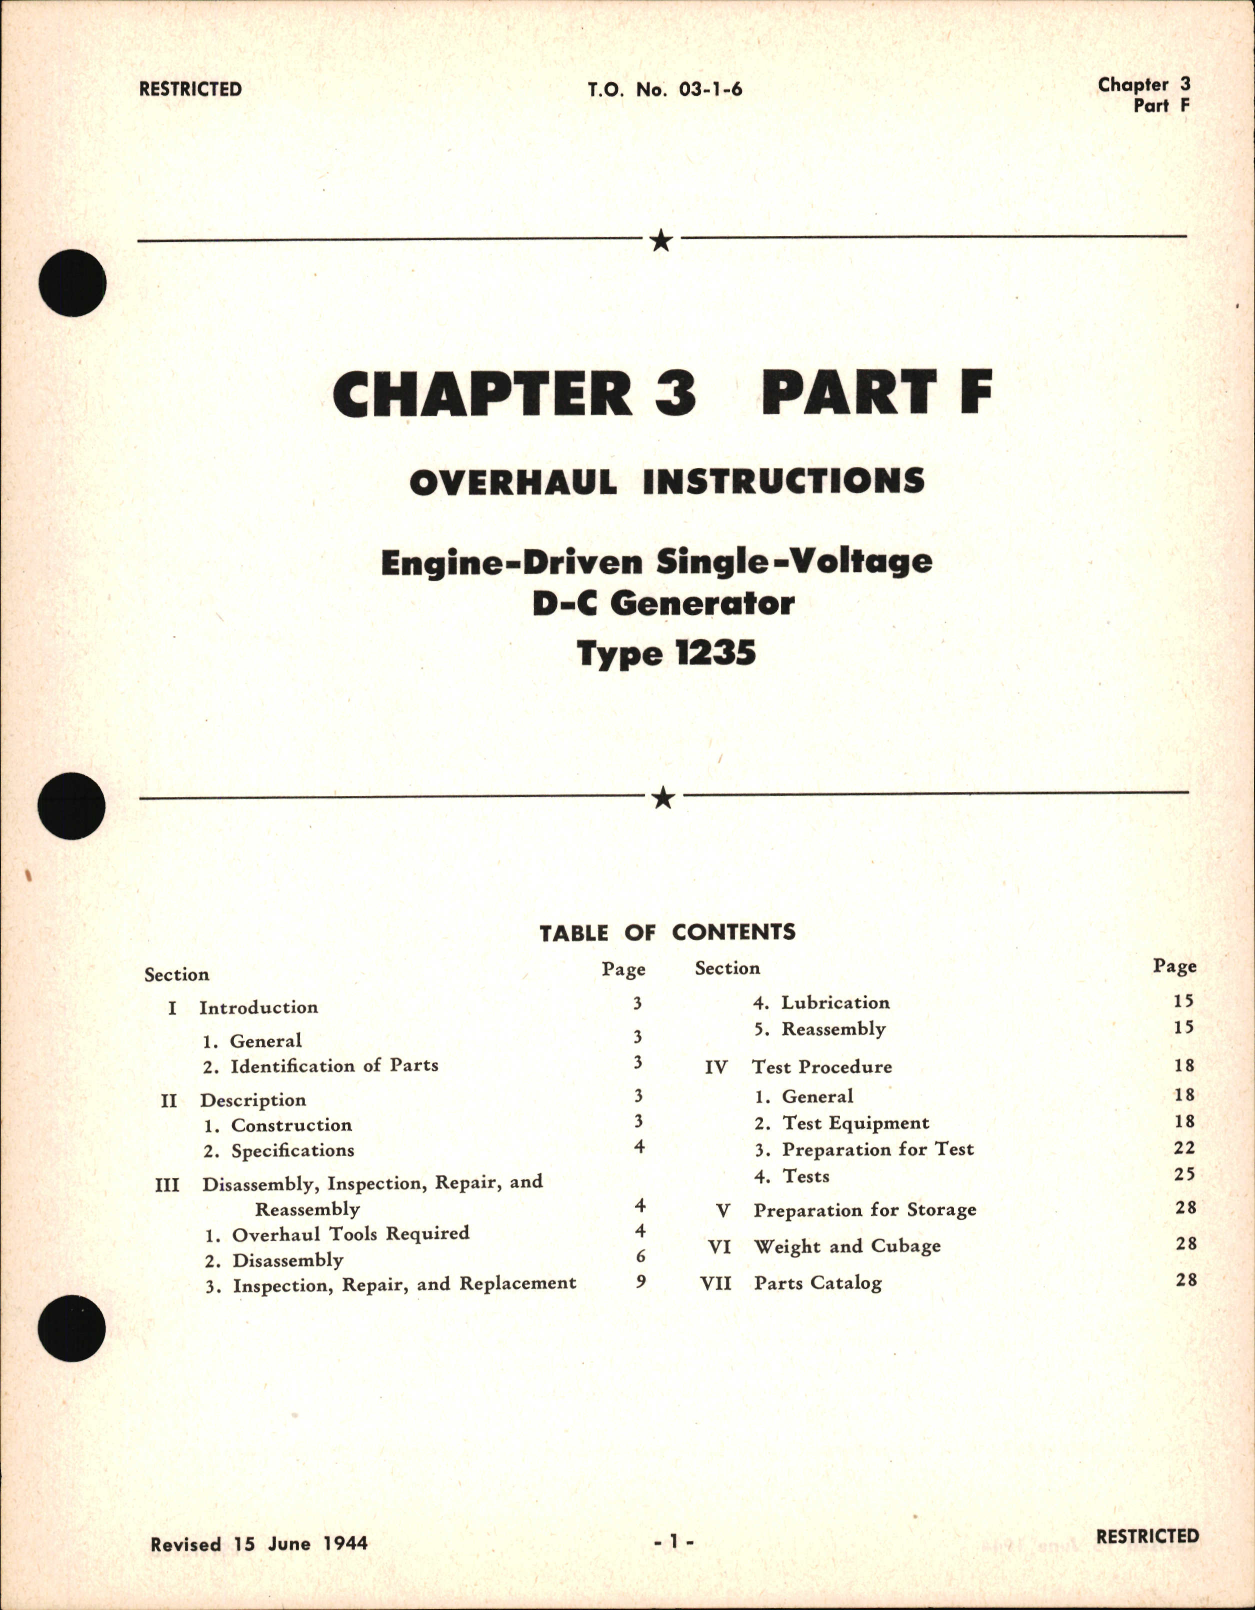 Sample page 1 from AirCorps Library document: Overhaul Instructions for Engine Driven Single Voltage D-C Generator, Type 1235